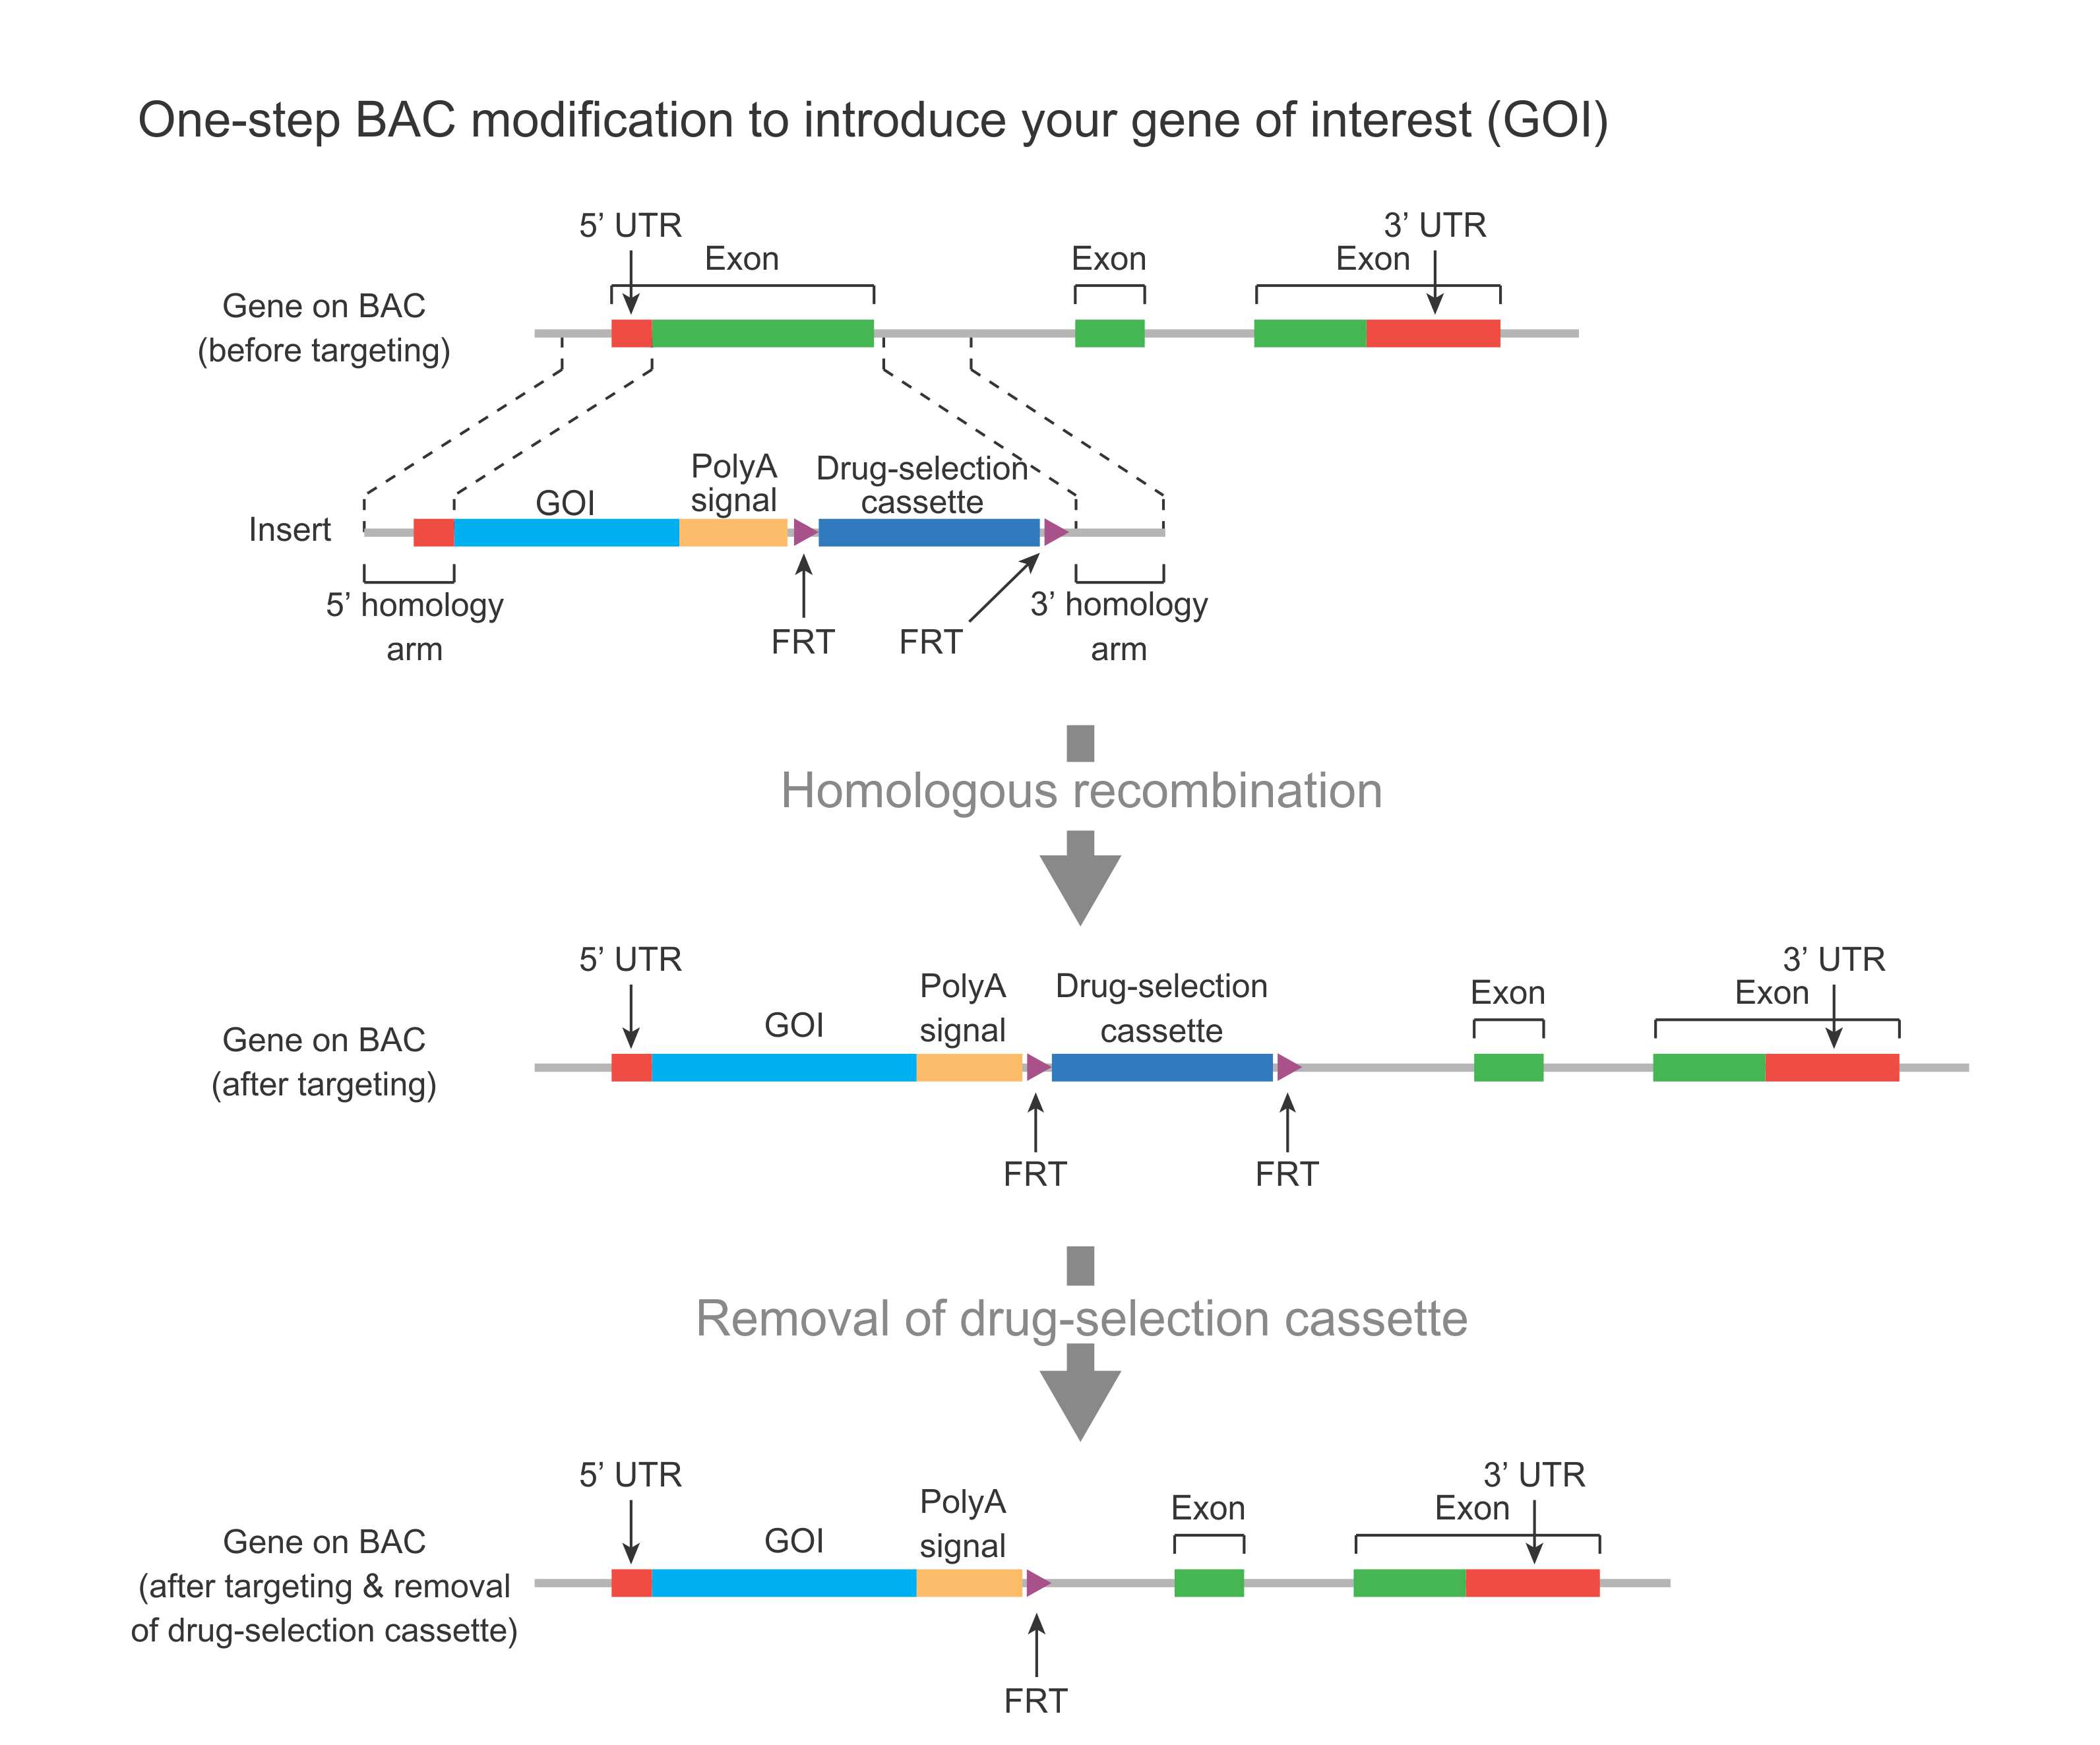 One-step Bac modification to introduce your gene of interest (GOI).